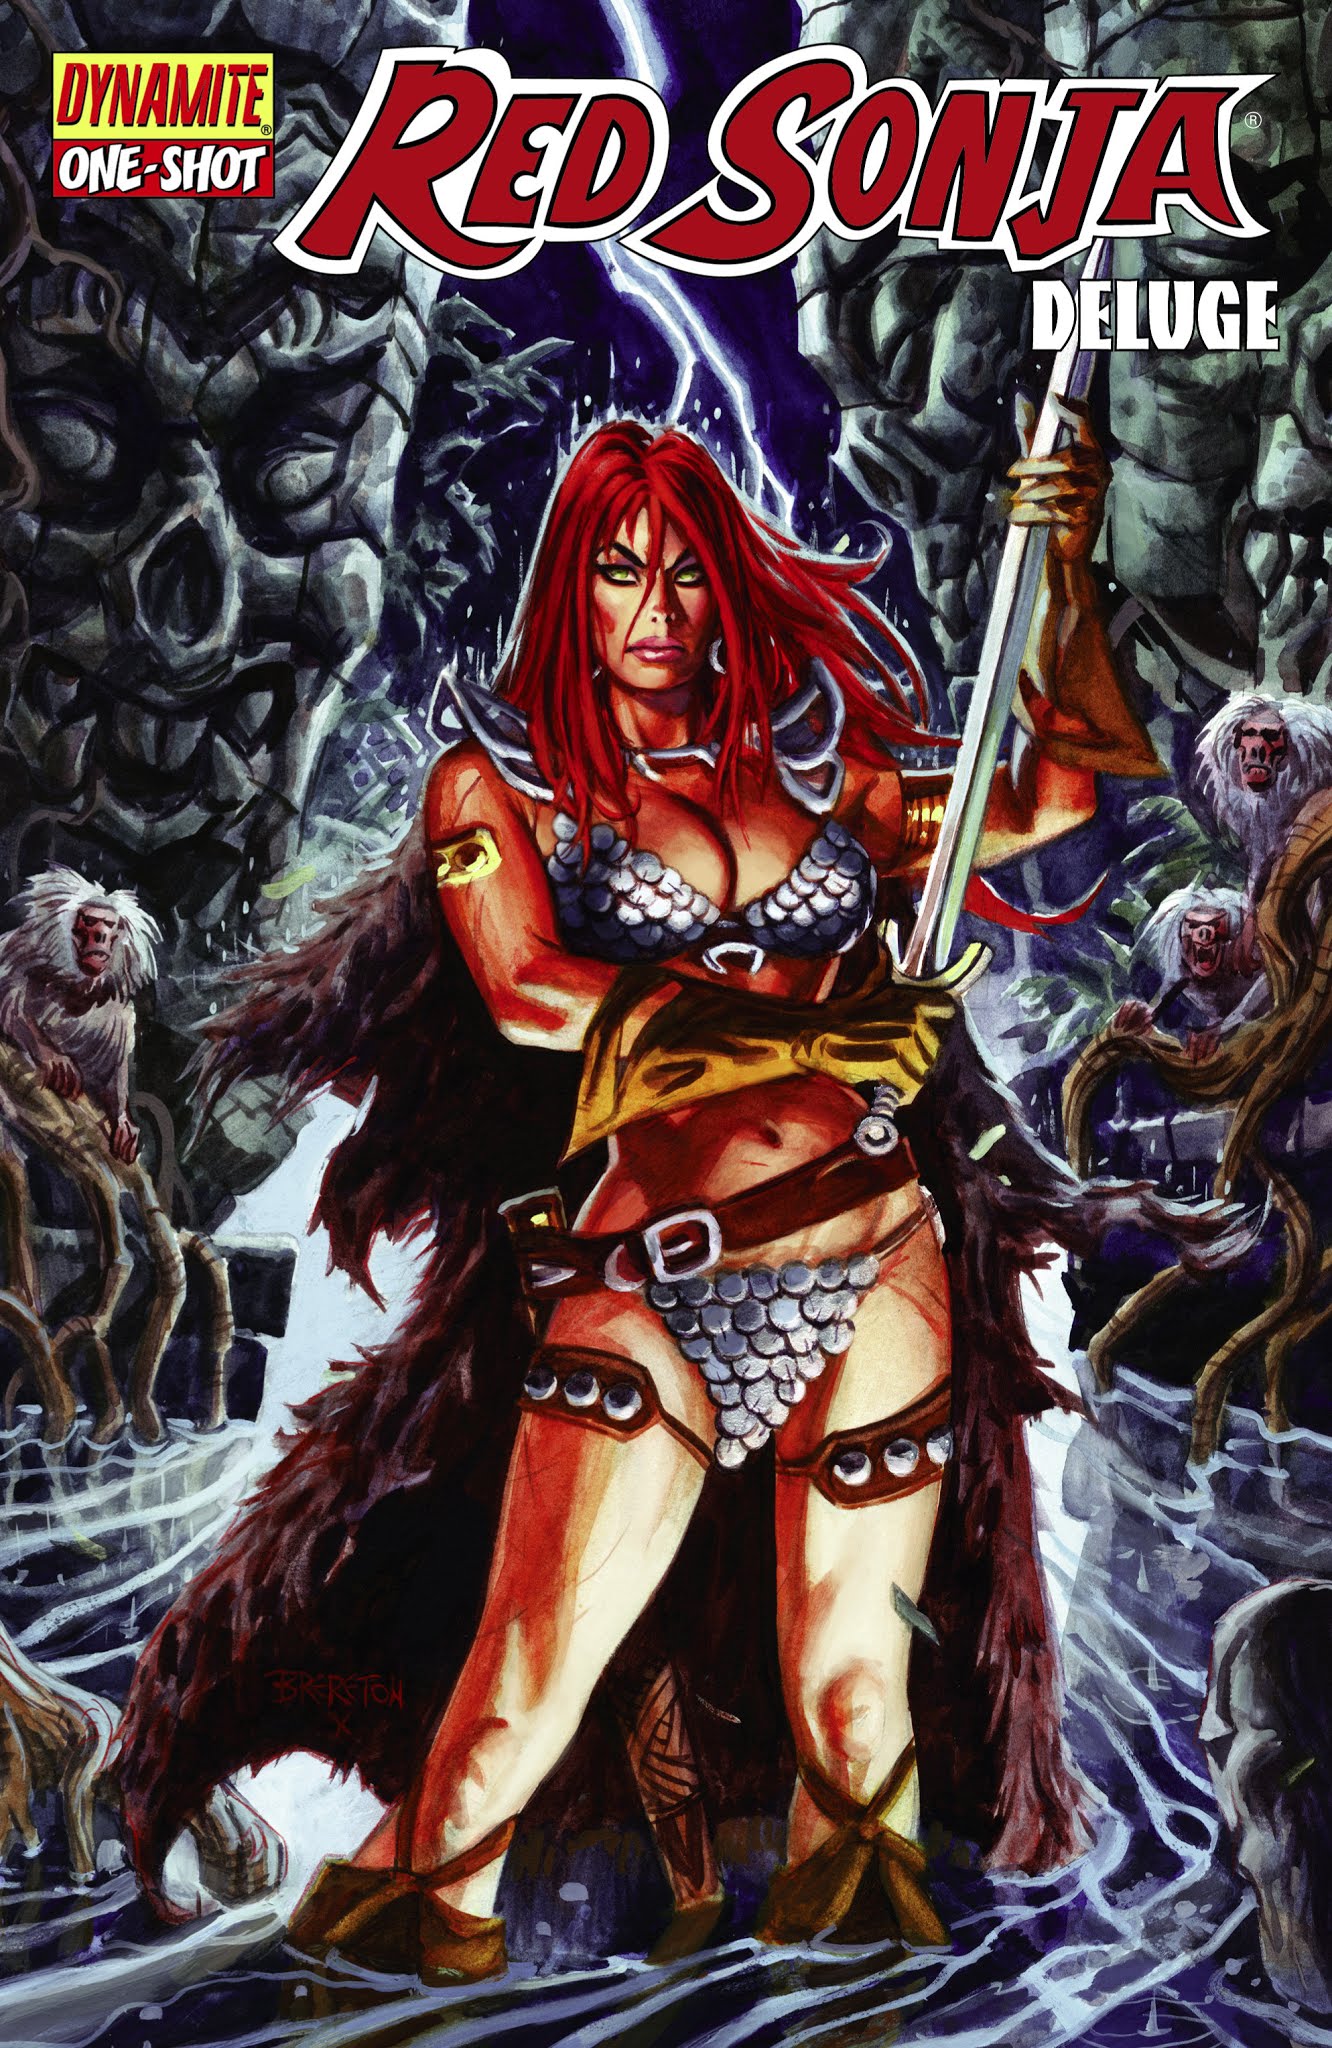 Read online Red Sonja Deluge comic -  Issue # Full - 1